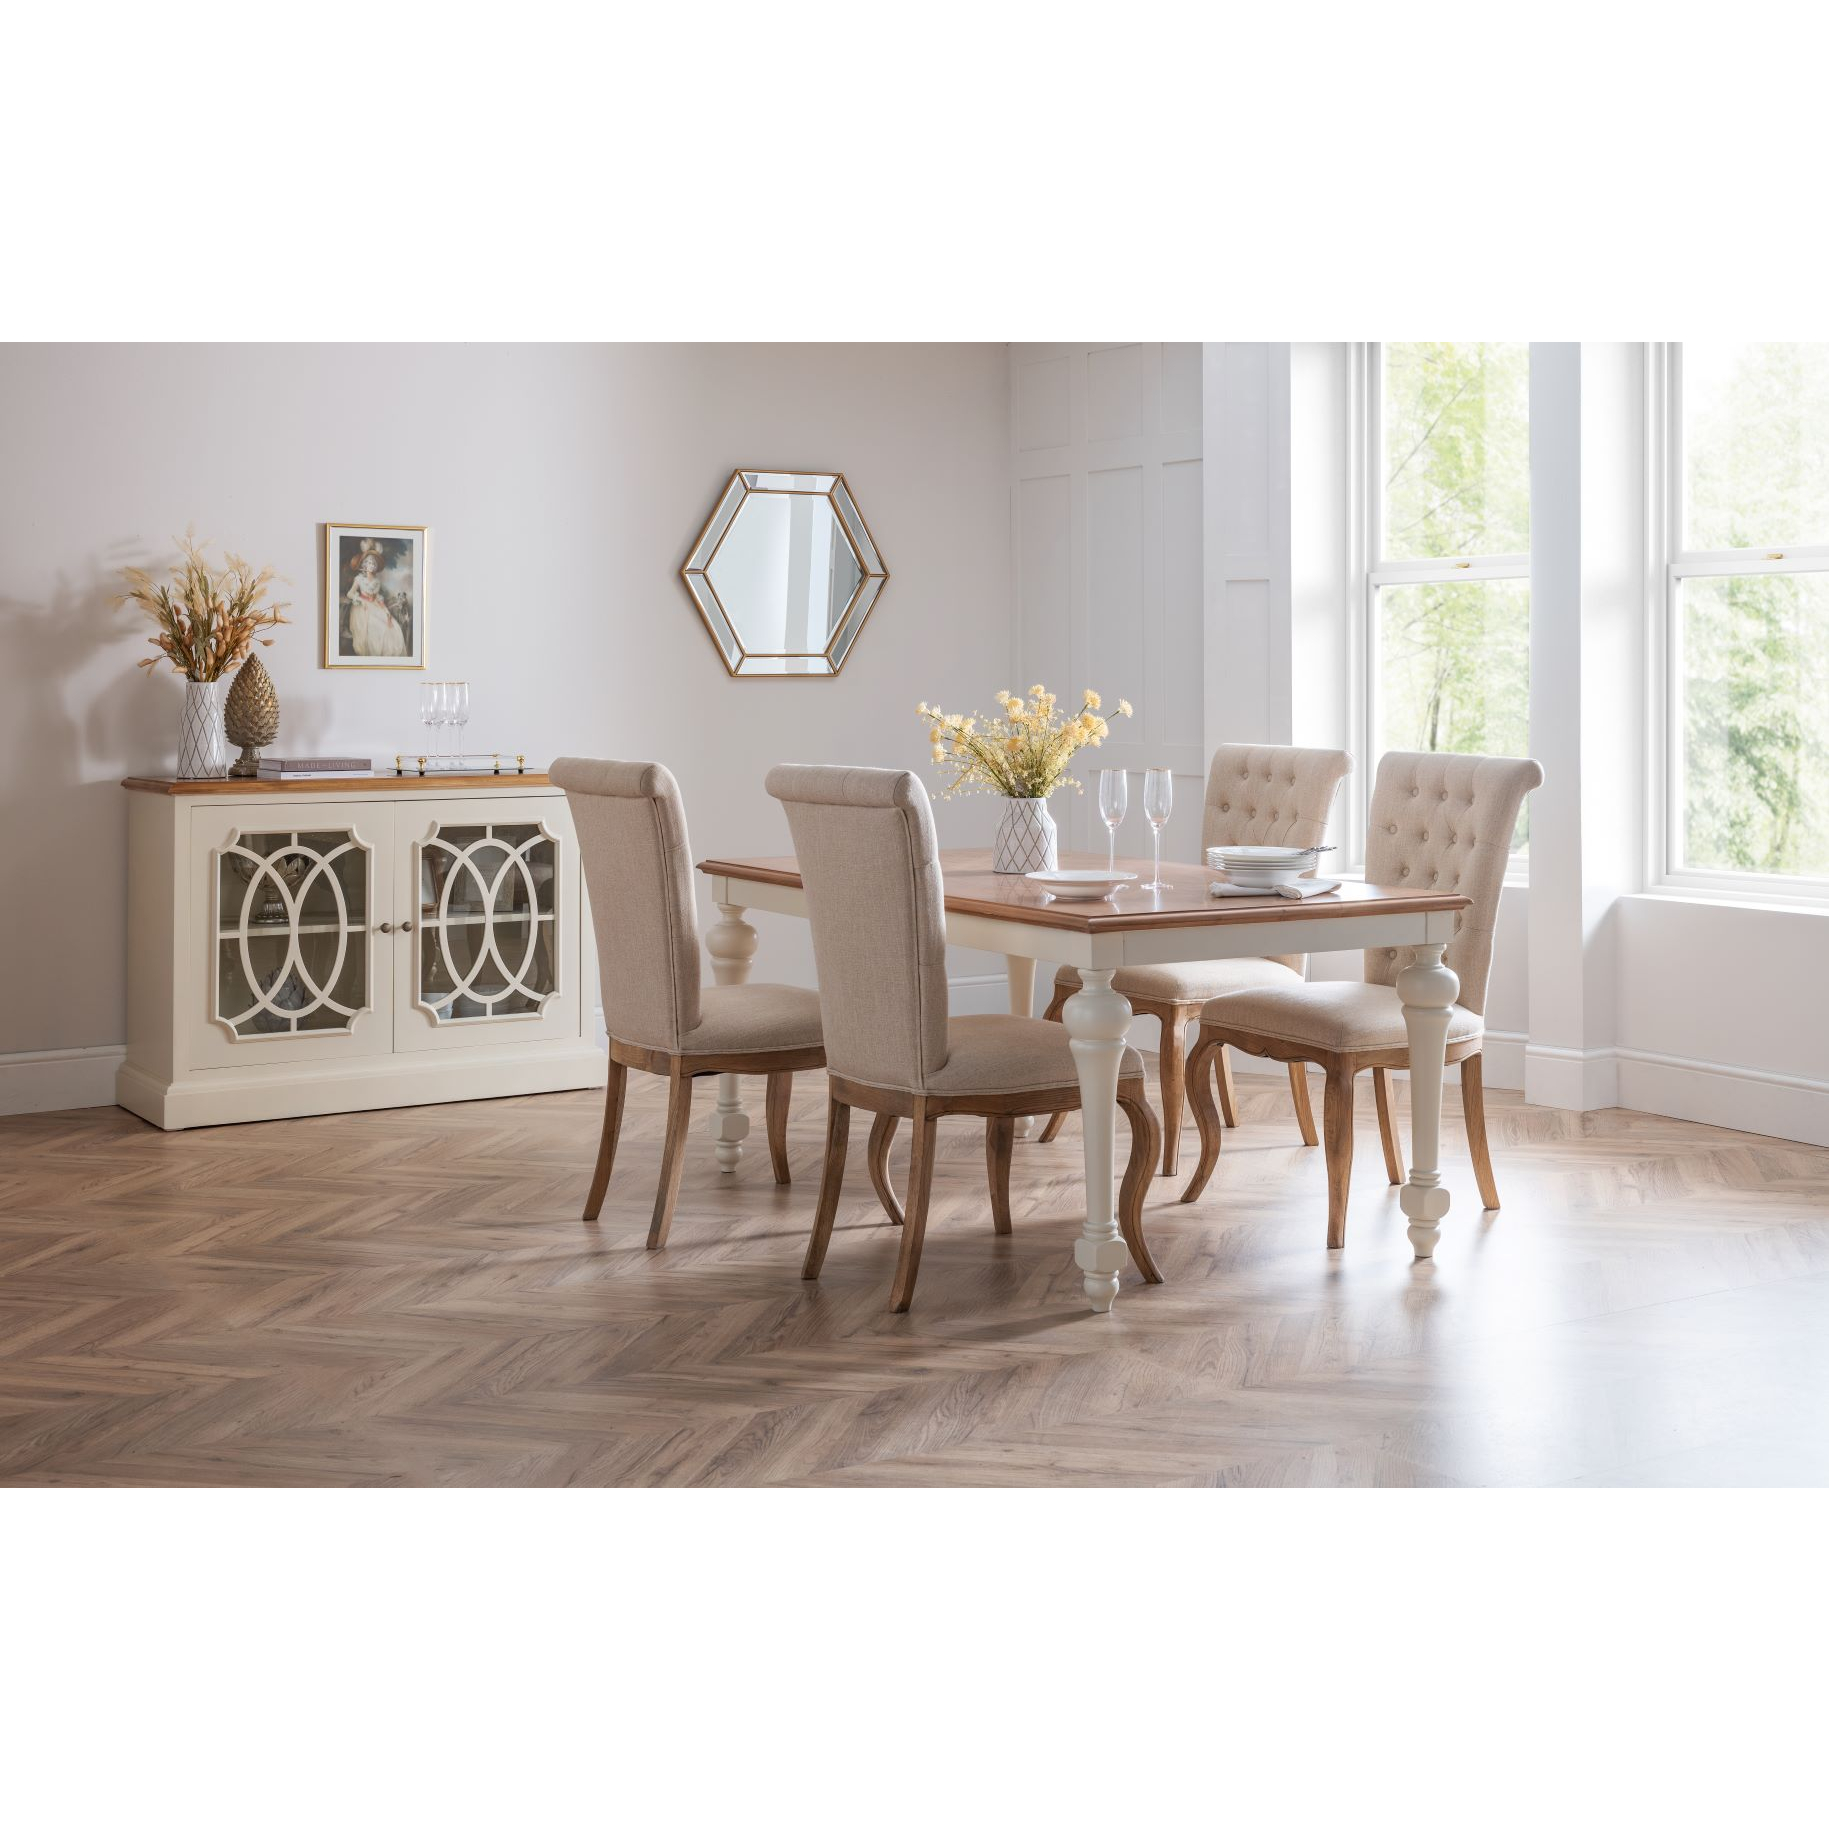 Trampling Mountaineer cash Gloucester French Style Dining Table | French Style Dining Furniture